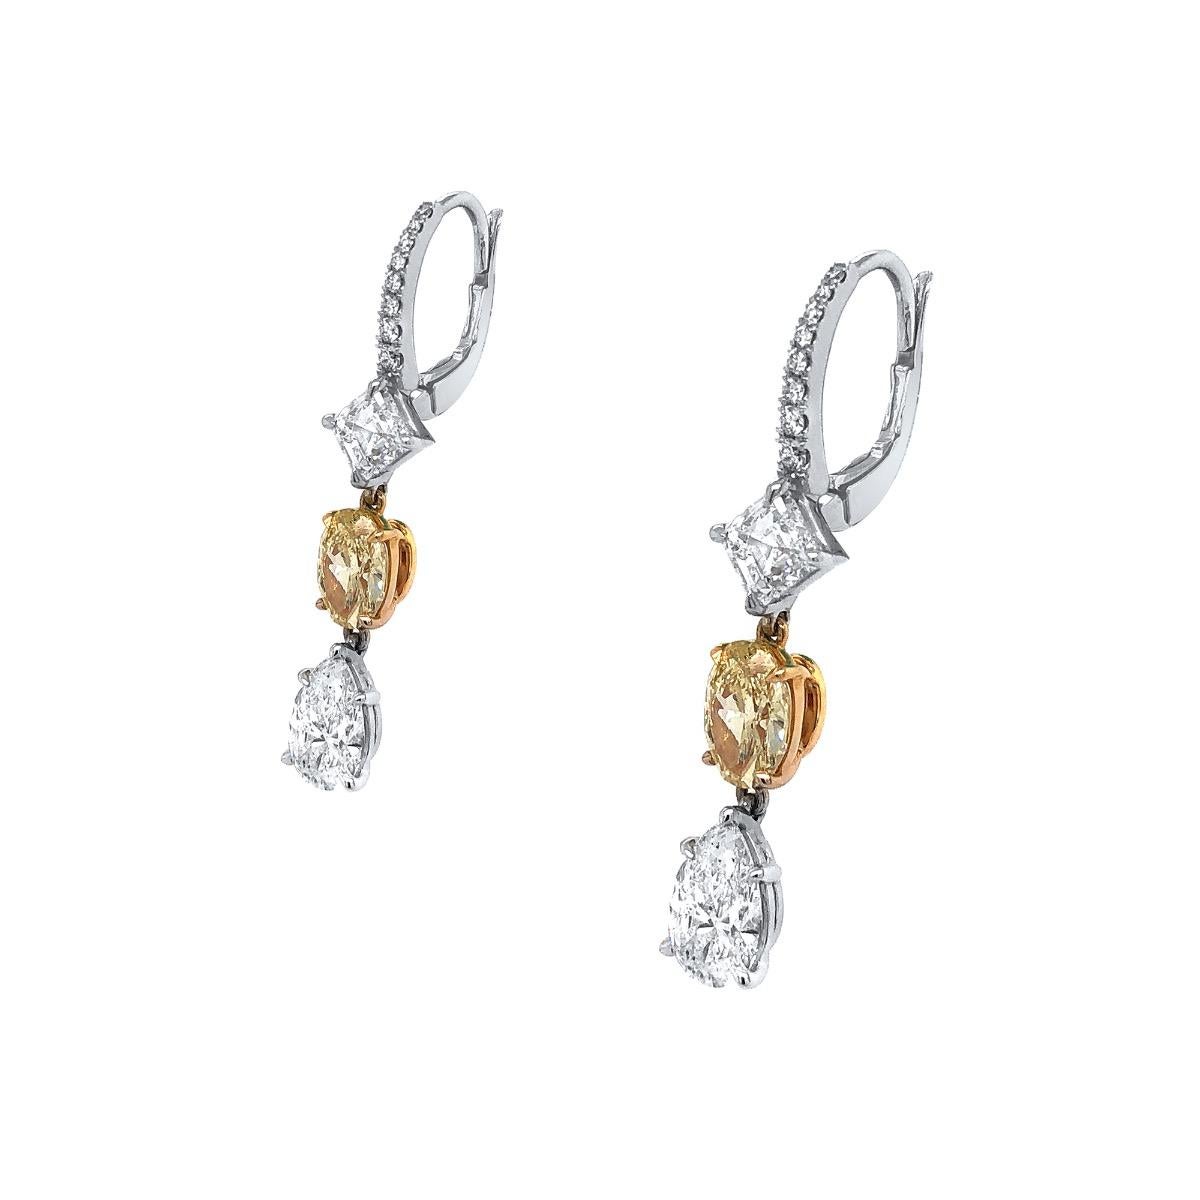 Style: Dropped Stlyled Fancy Yellow Diamond Earrings with White Diamonds 

Metal type: 18kt White Gold 

2 total  1.97ct I yellow diamonds 

2 total 1.42ct I-W range Si2
 
2 total 2.00ct pear shape F/Si2 White Diamonds   
 
Location Of Stone: None